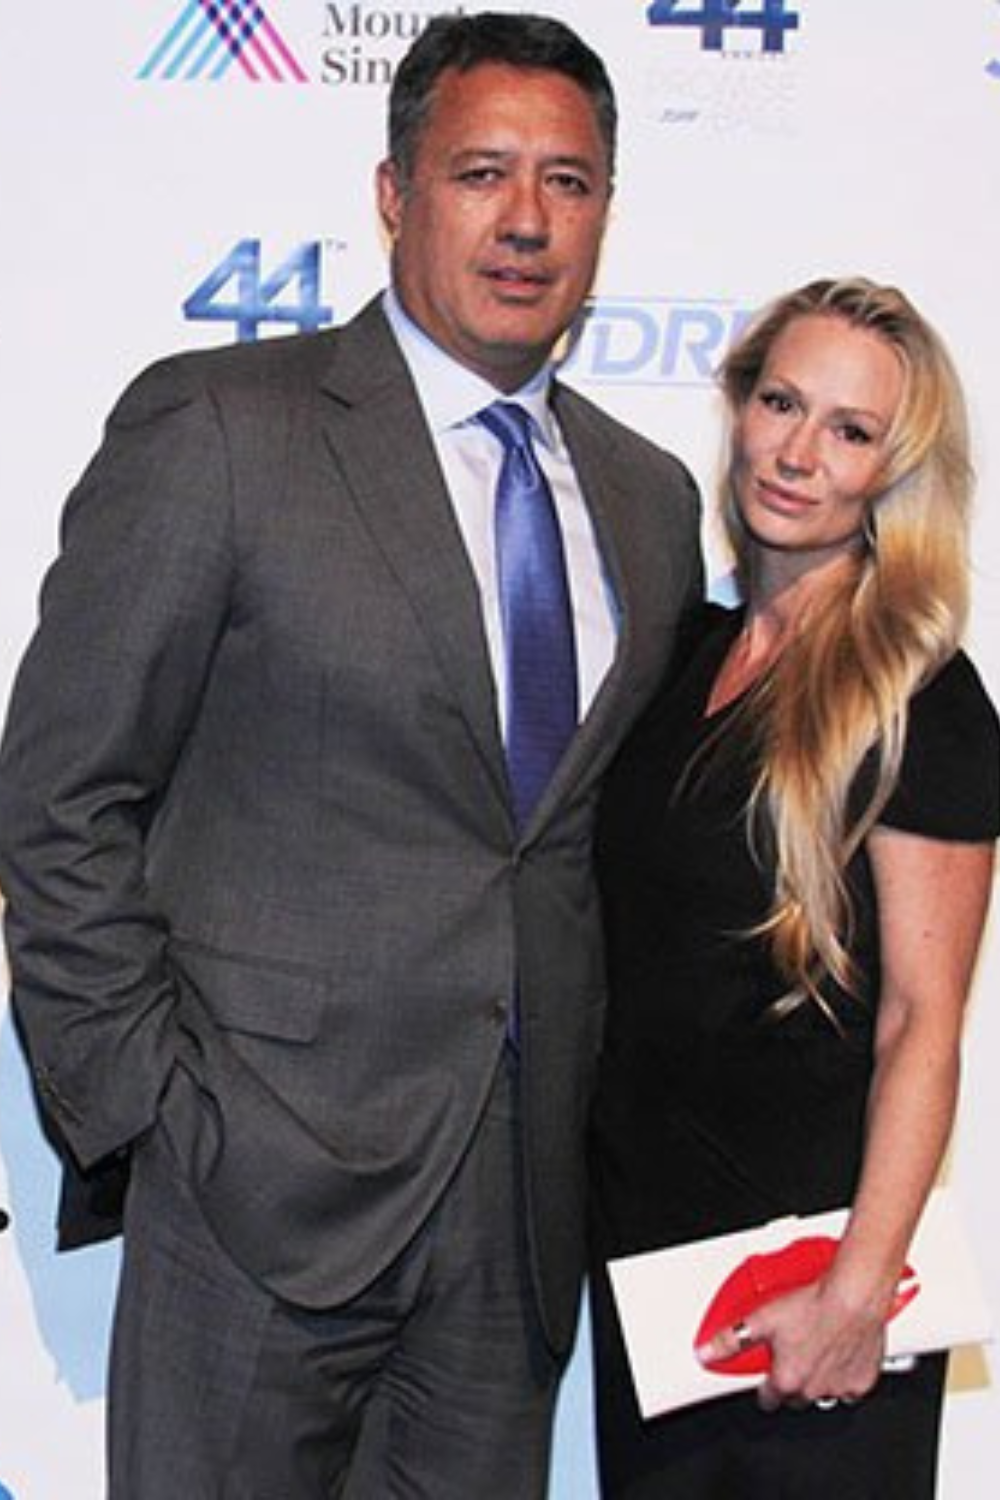 Ron Darling With His Wife Joanna Last